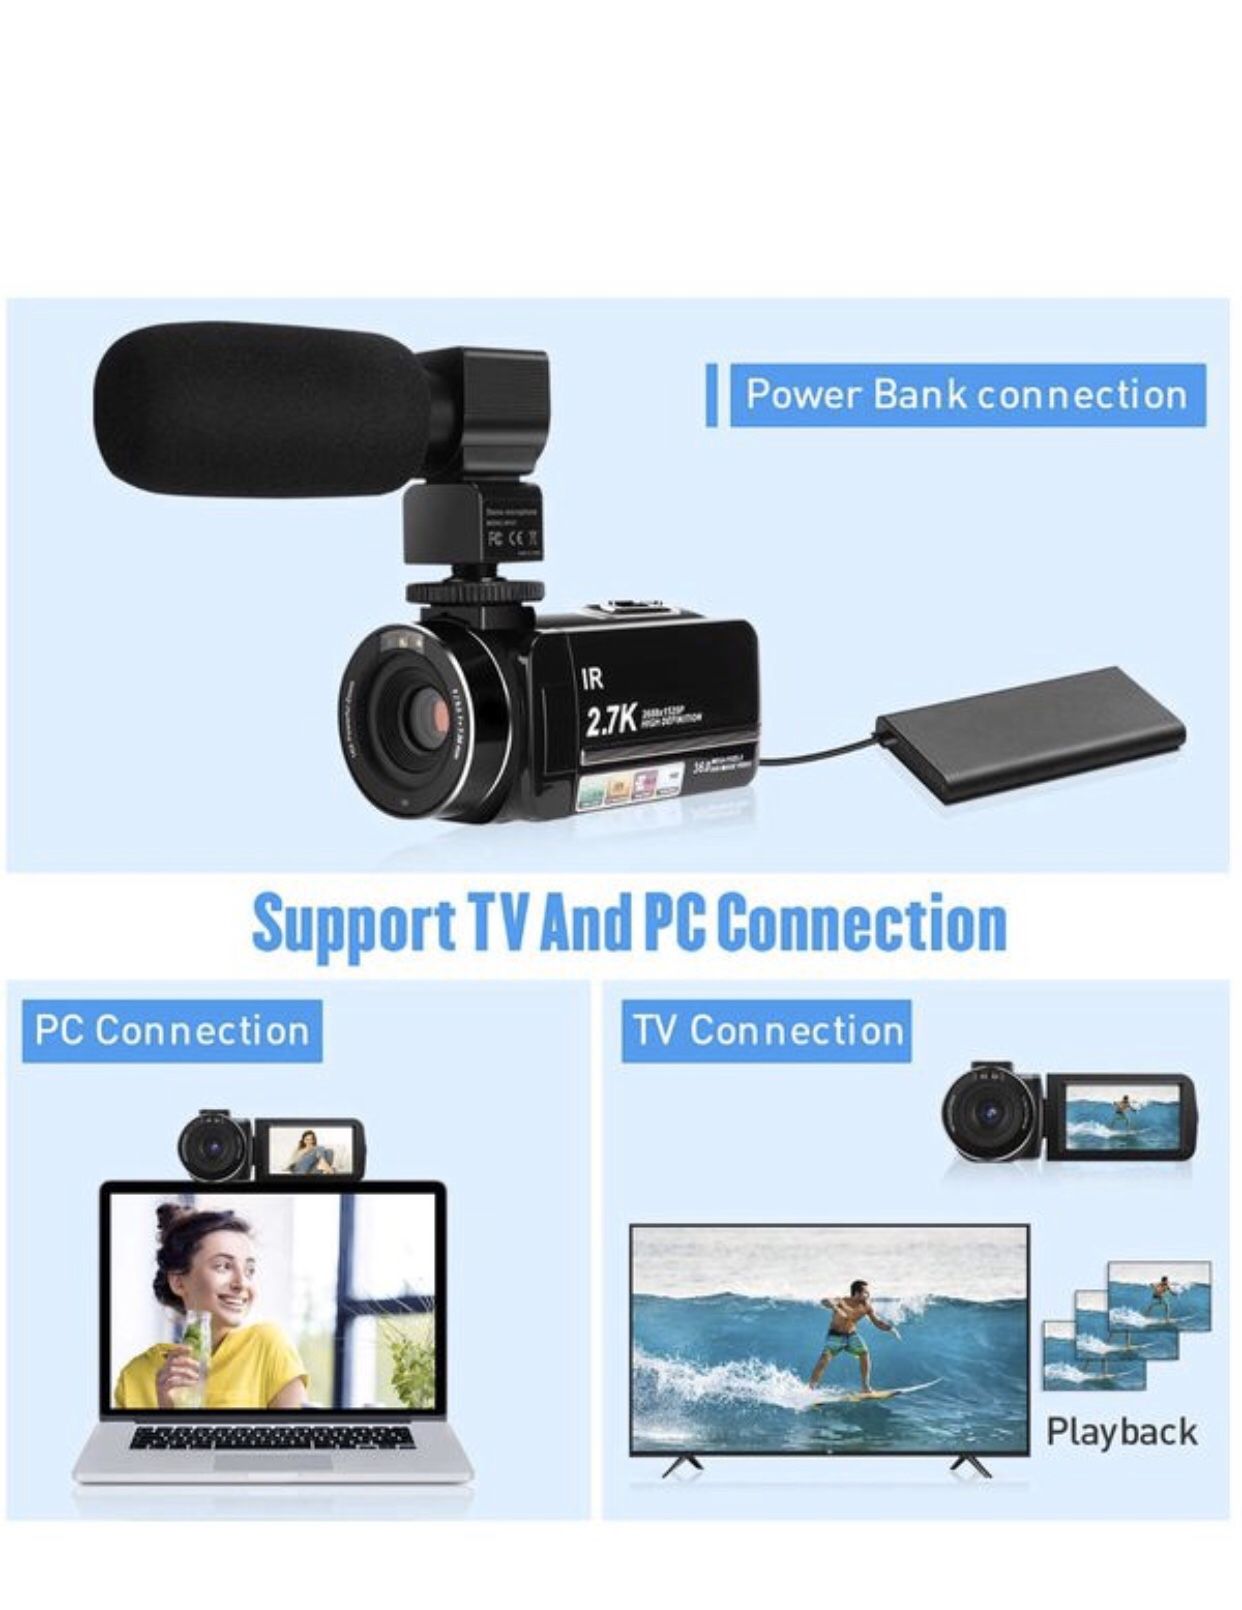 2.7K Video Camera HD Vlogging Camera Camcorder for YouTube 3.0" IPS Touch Screen IR Night Vision 16X Digital Zoom Recorder with Microphone,Len Hood,